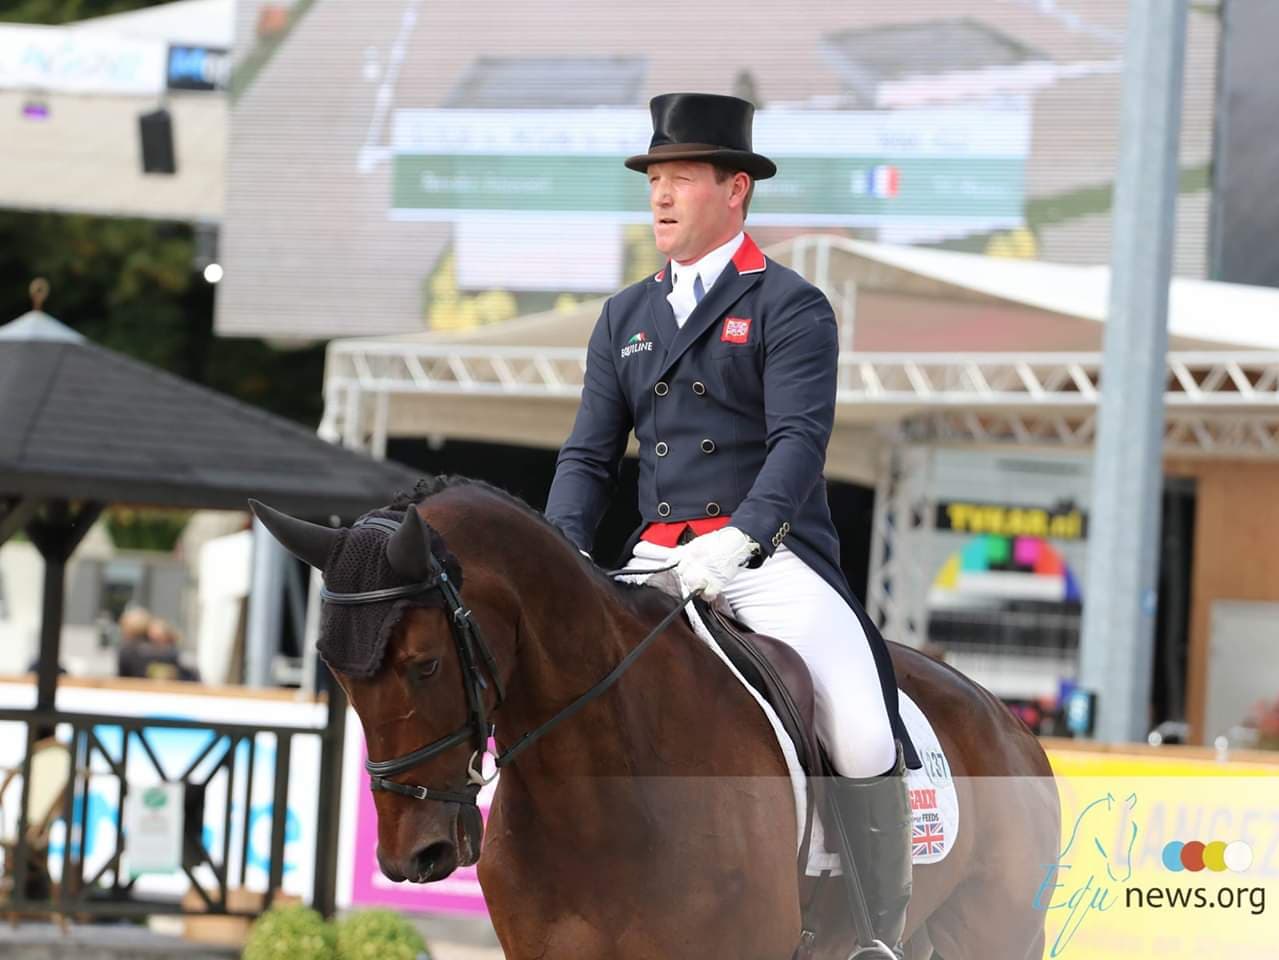 Oliver Townend neemt leiding op de Kentucky Three Day Eventing